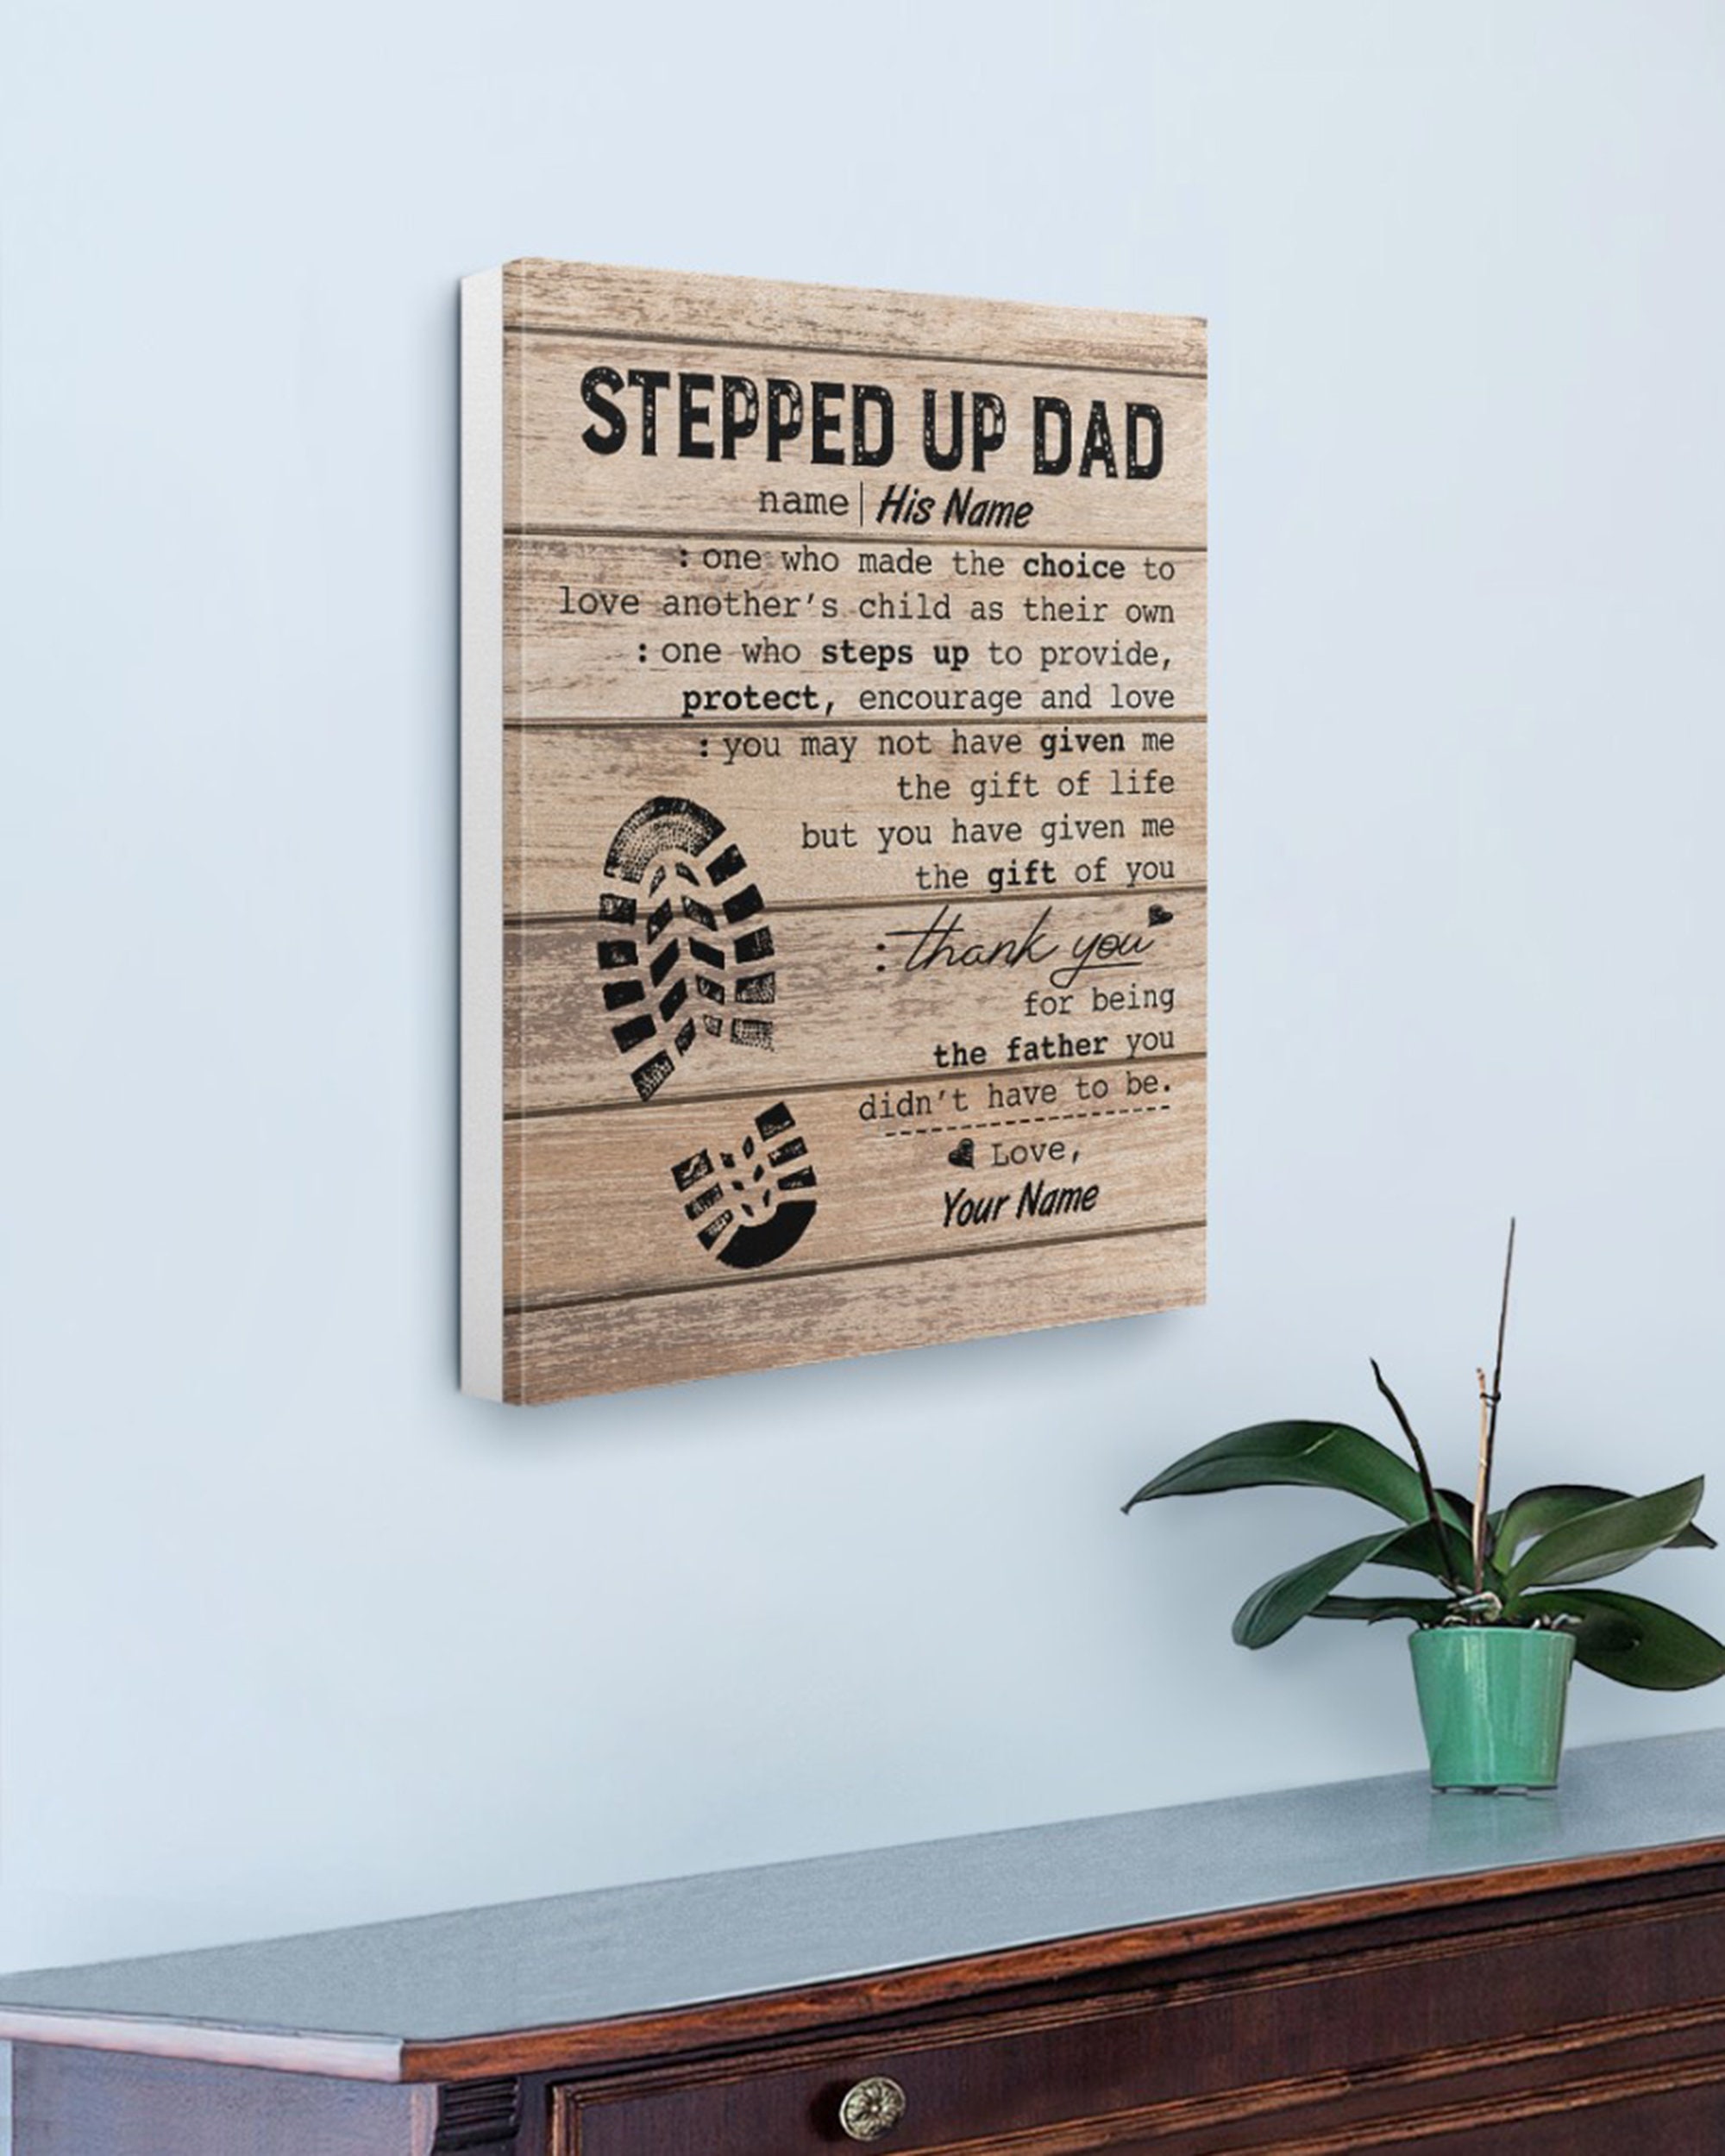 Personalized To My Stepped Dad Fathers Day Canvas Home Decor